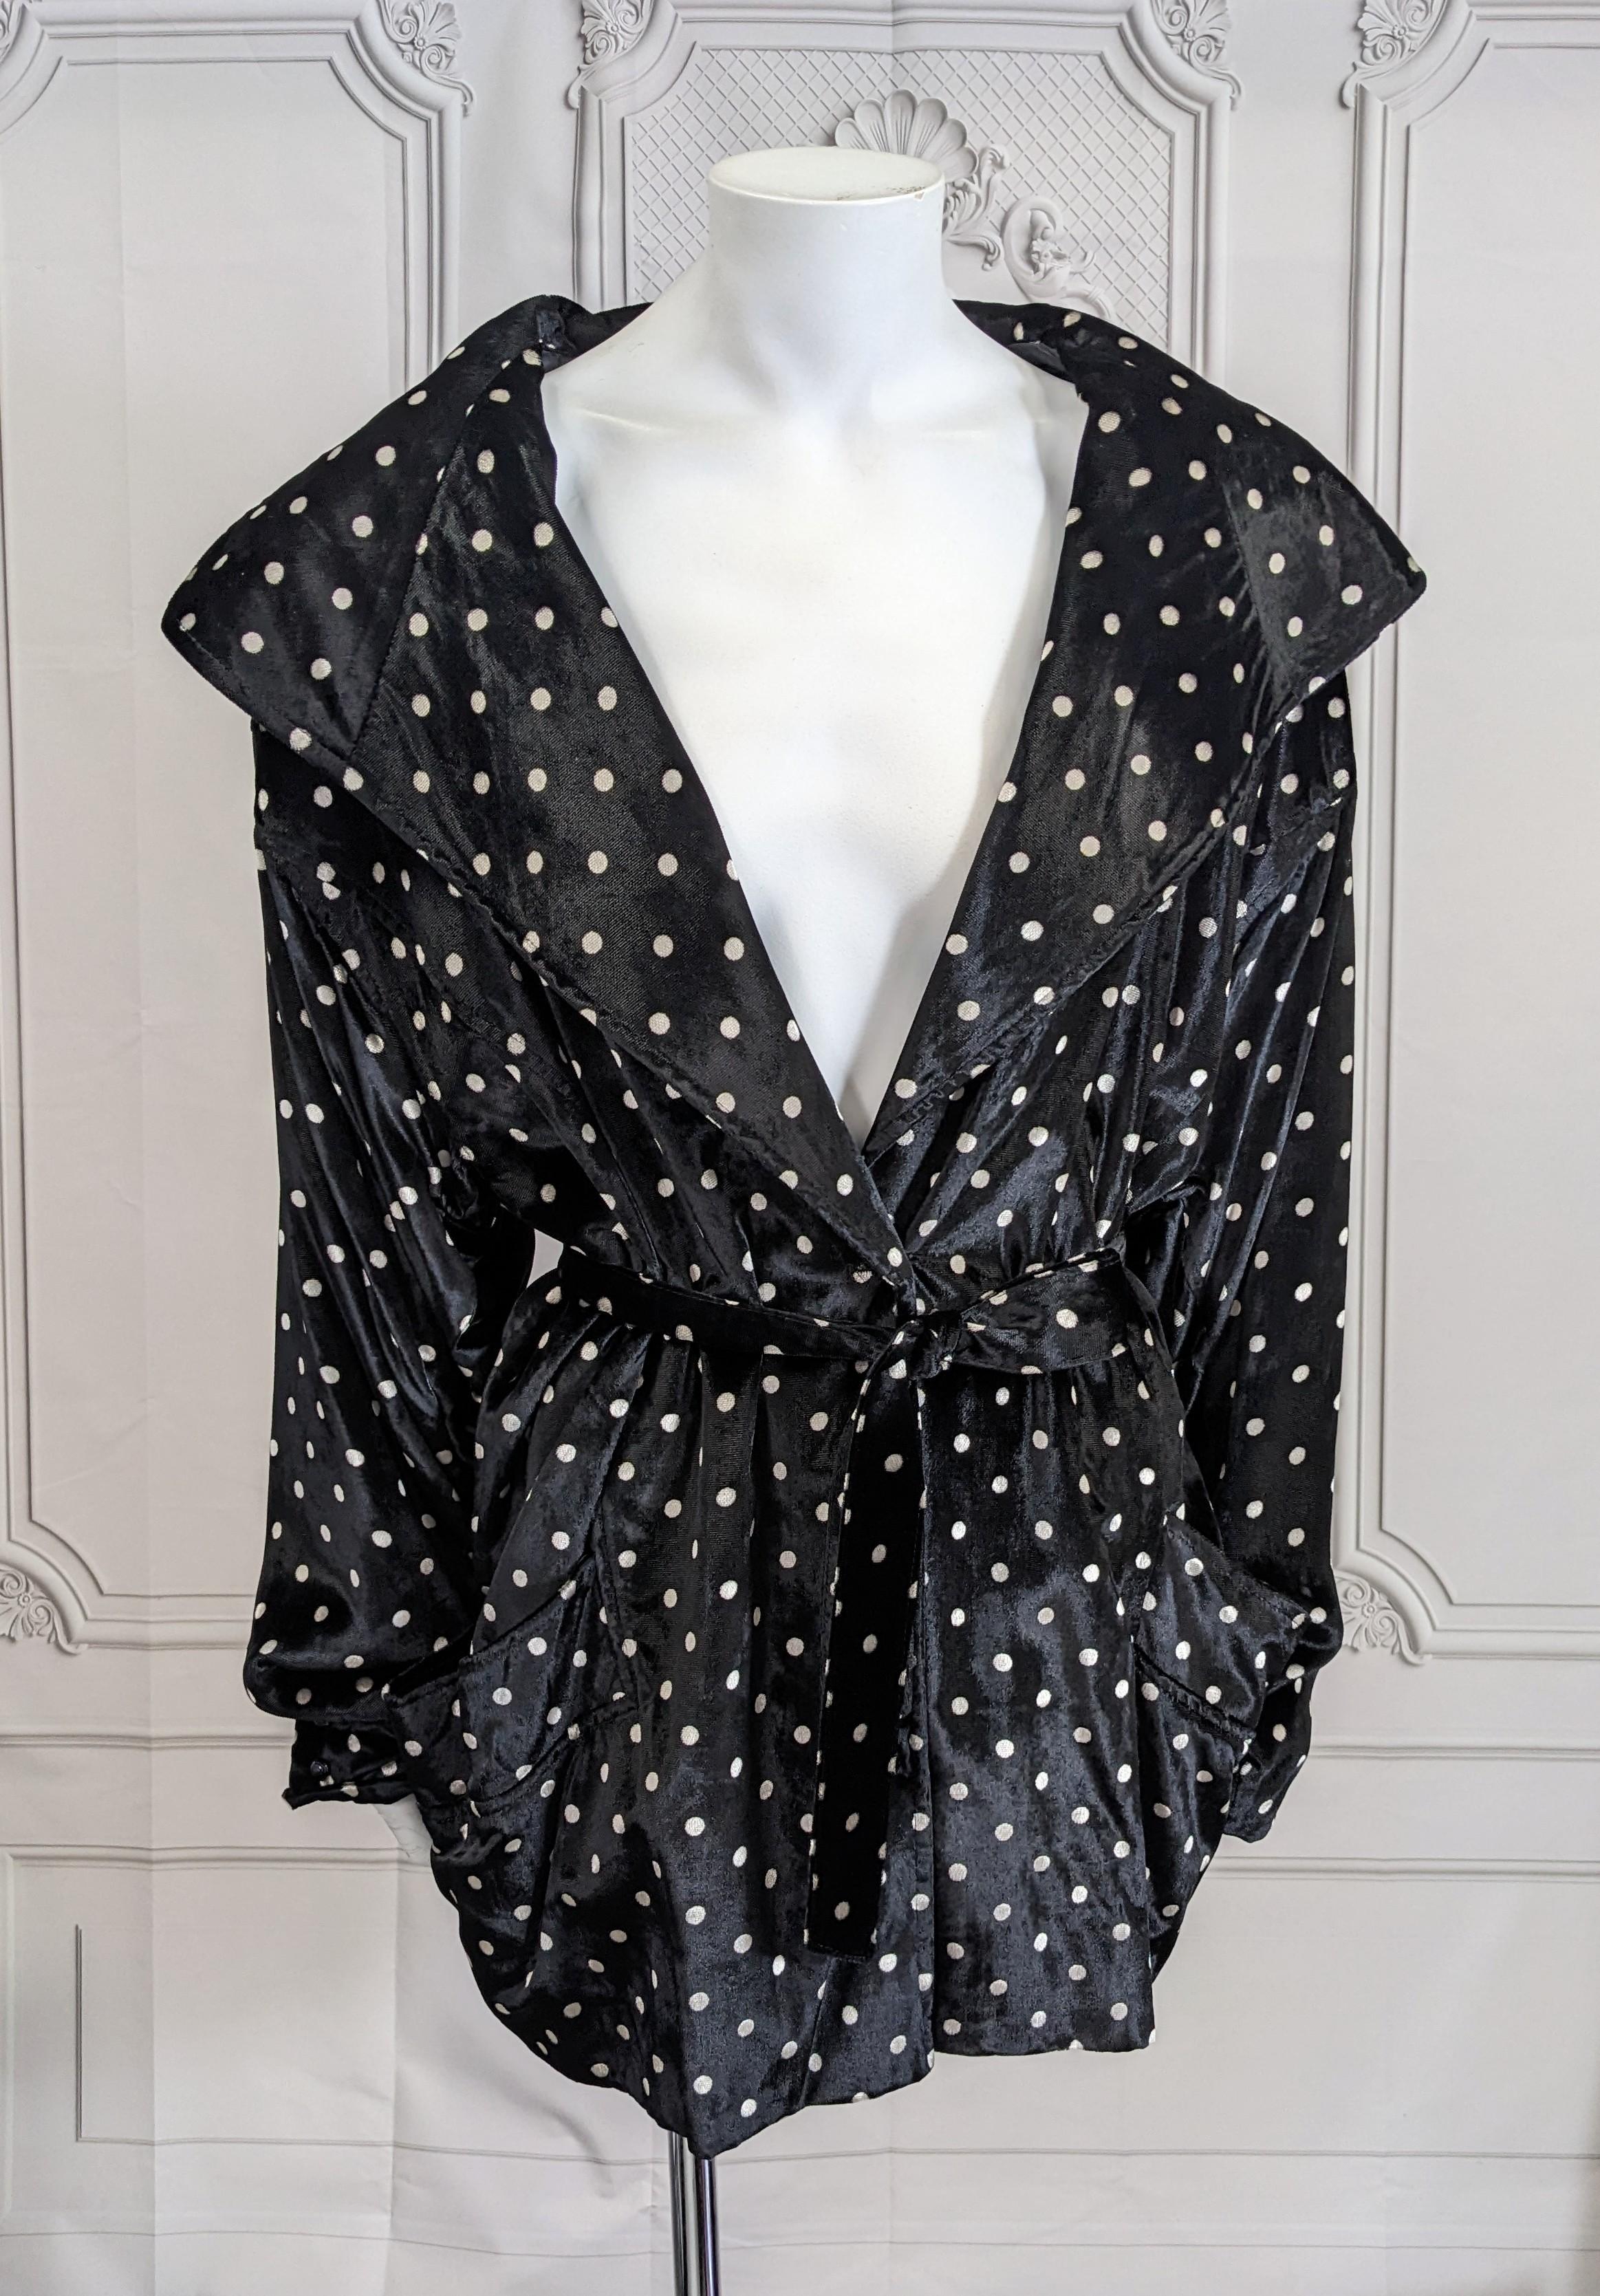 Ungaro Velvet Polka Dot Evening Jacket from the 1980's. Large shoulder pads anchor this jacket with large shawl collar and stand away pockets. Oversized cut closed with small jet buttons and belt. 1980's France. Size 44. 